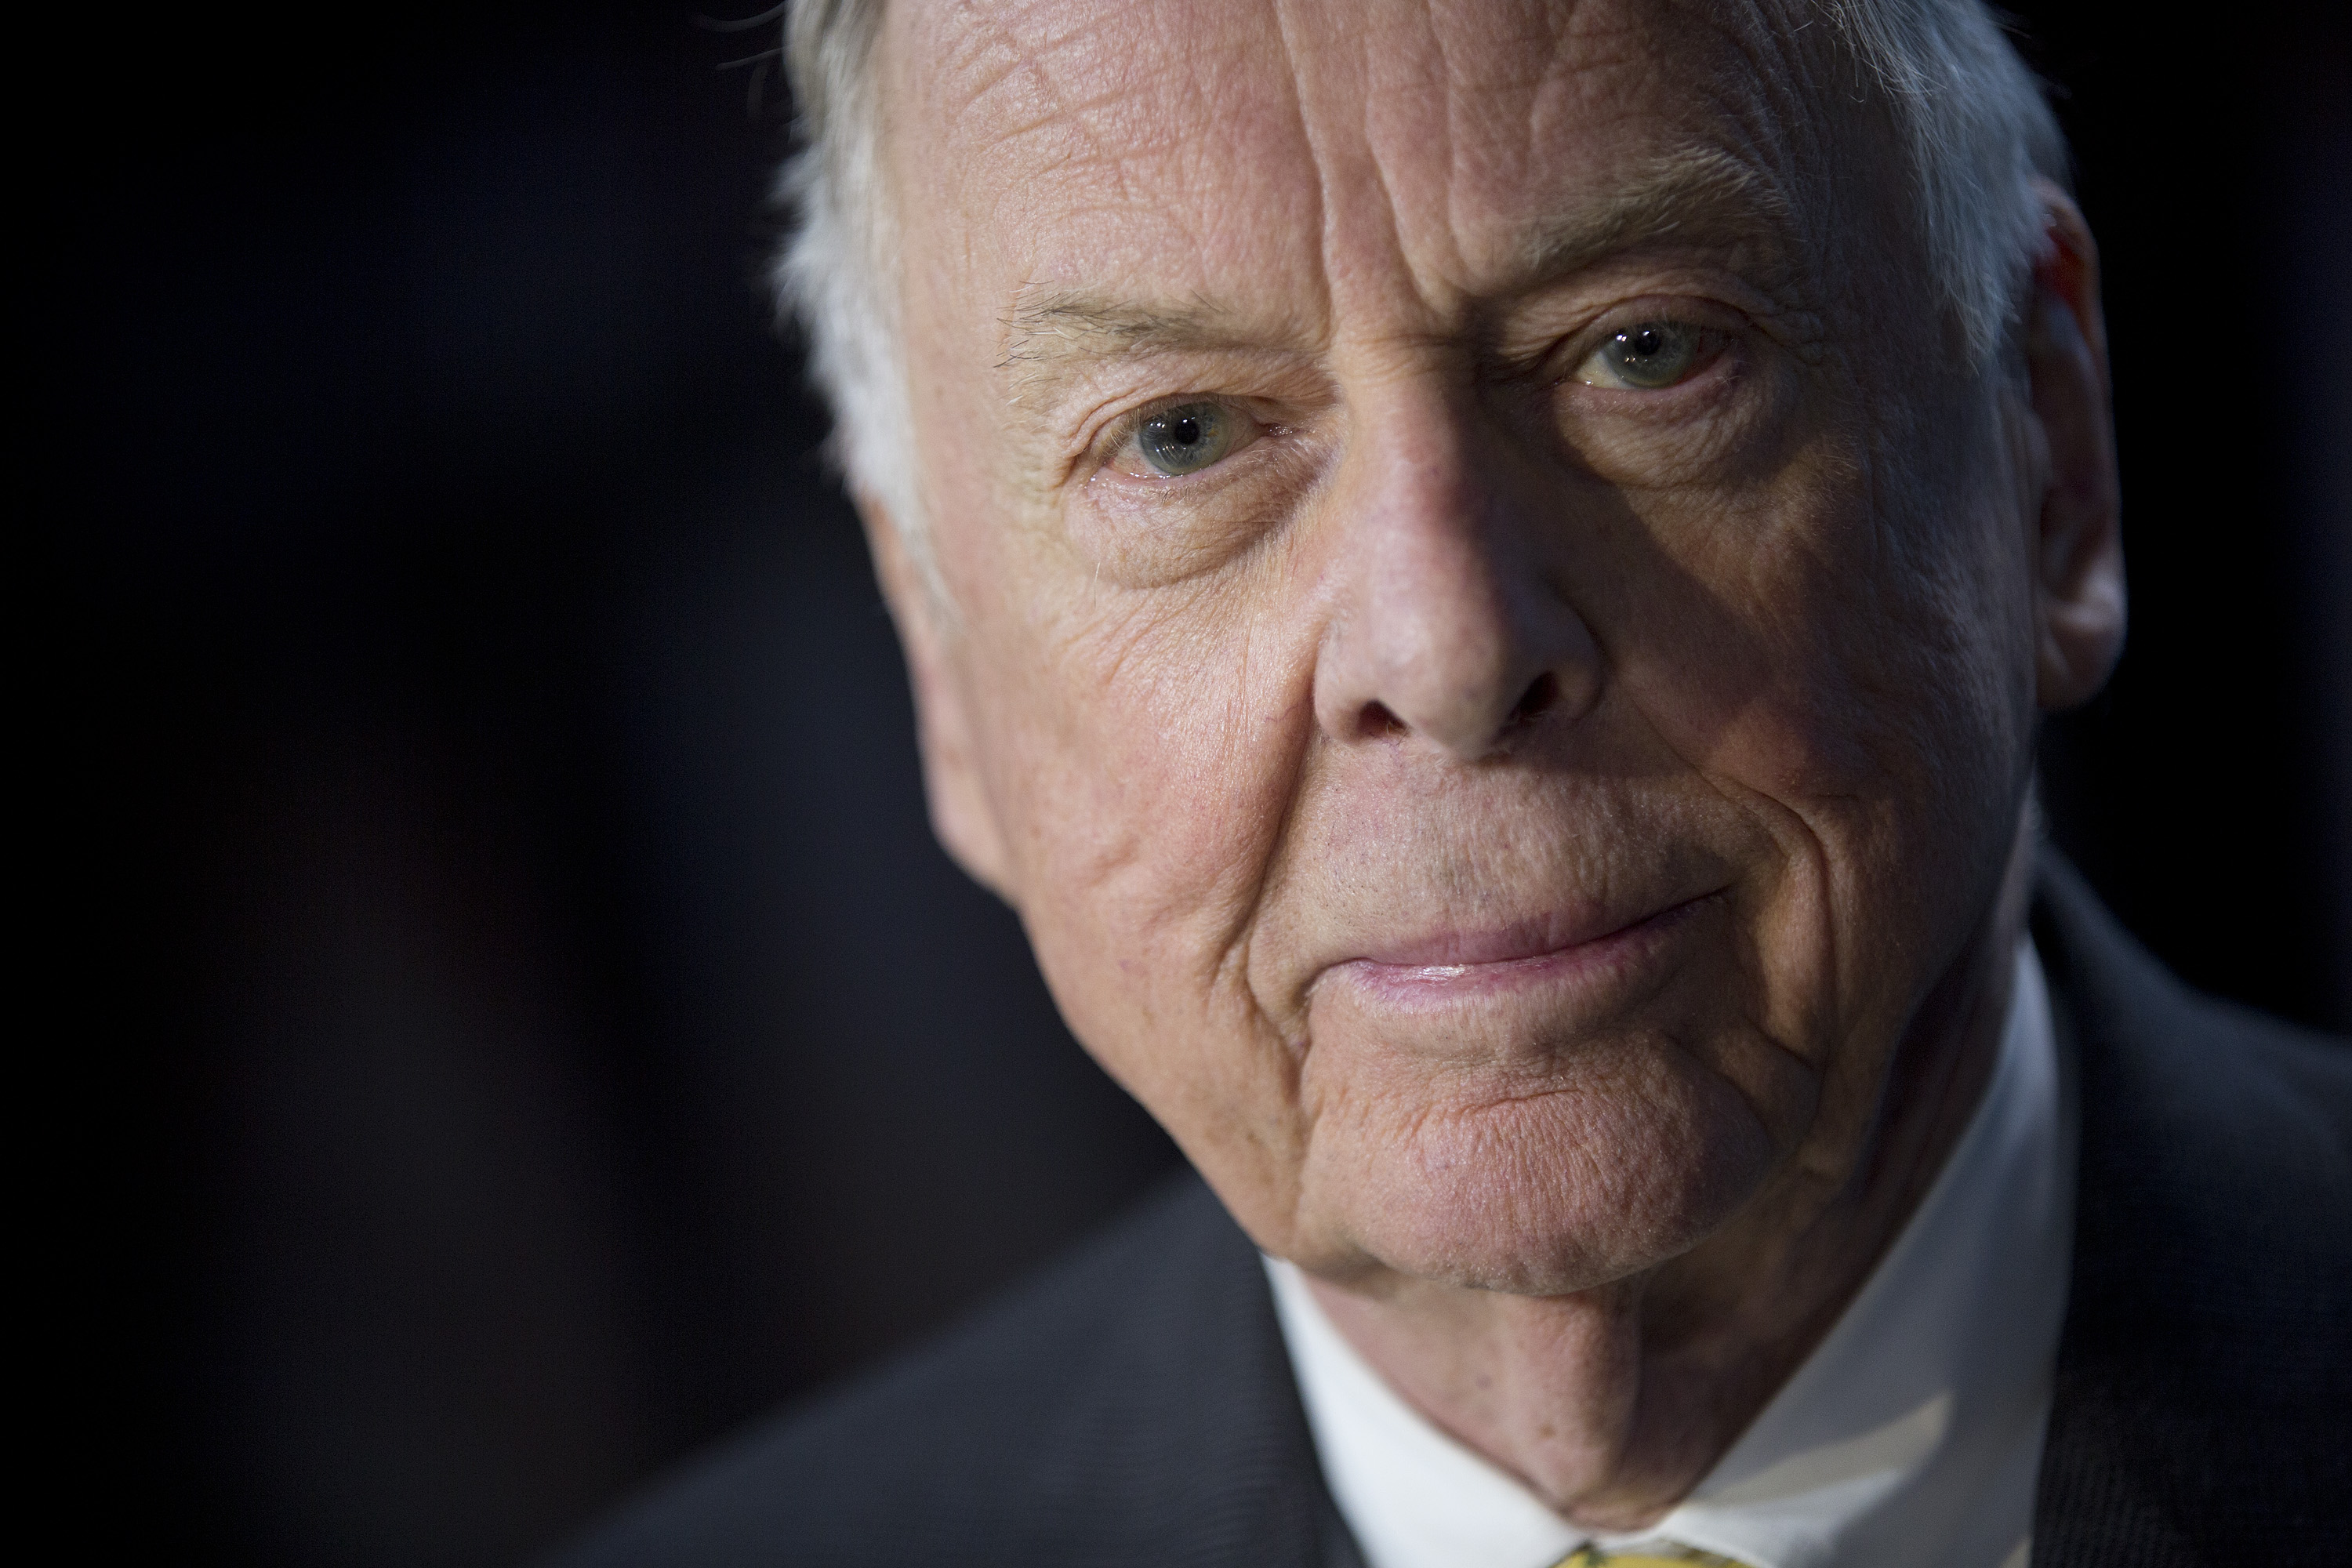 T. Boone Pickens, founder and chief executive officer of BP Capital LLC, sits for a photograph following a Bloomberg Television interview in Washington, D.C. on April 3, 2013.